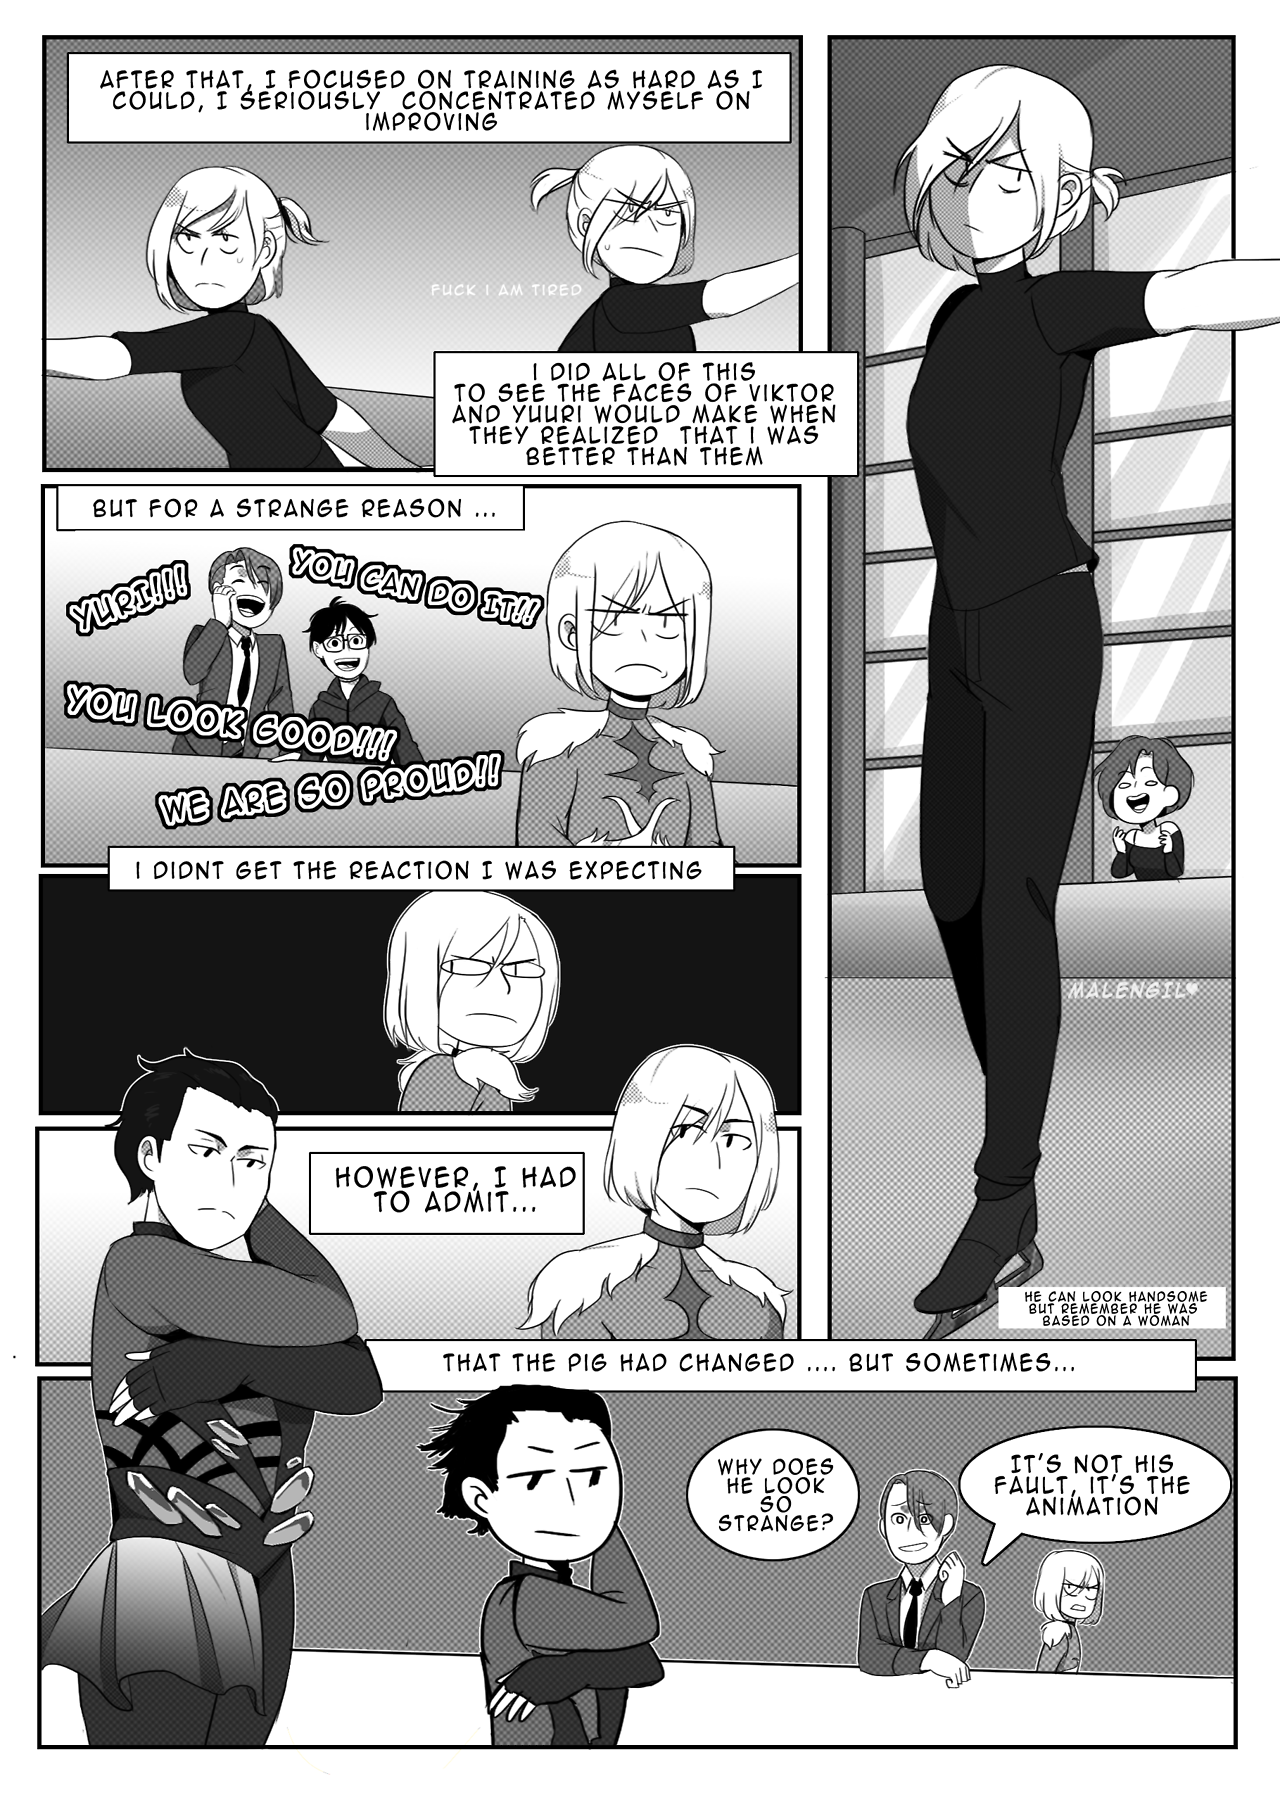 malengilblog: Yuri on ice parody, completed  This was part of a yuri on ice Fanbook